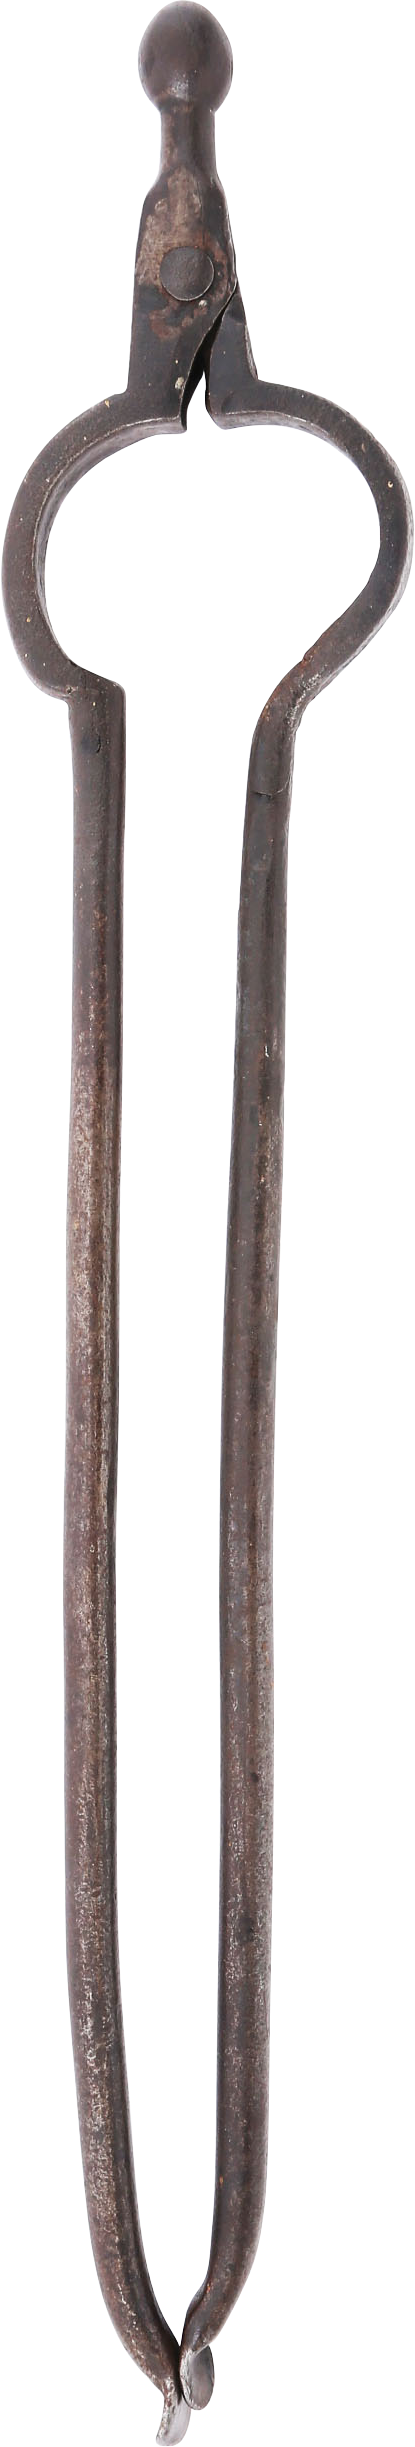 COLONIAL AMERICAN FIRE TONGS C.1750 - Fagan Arms